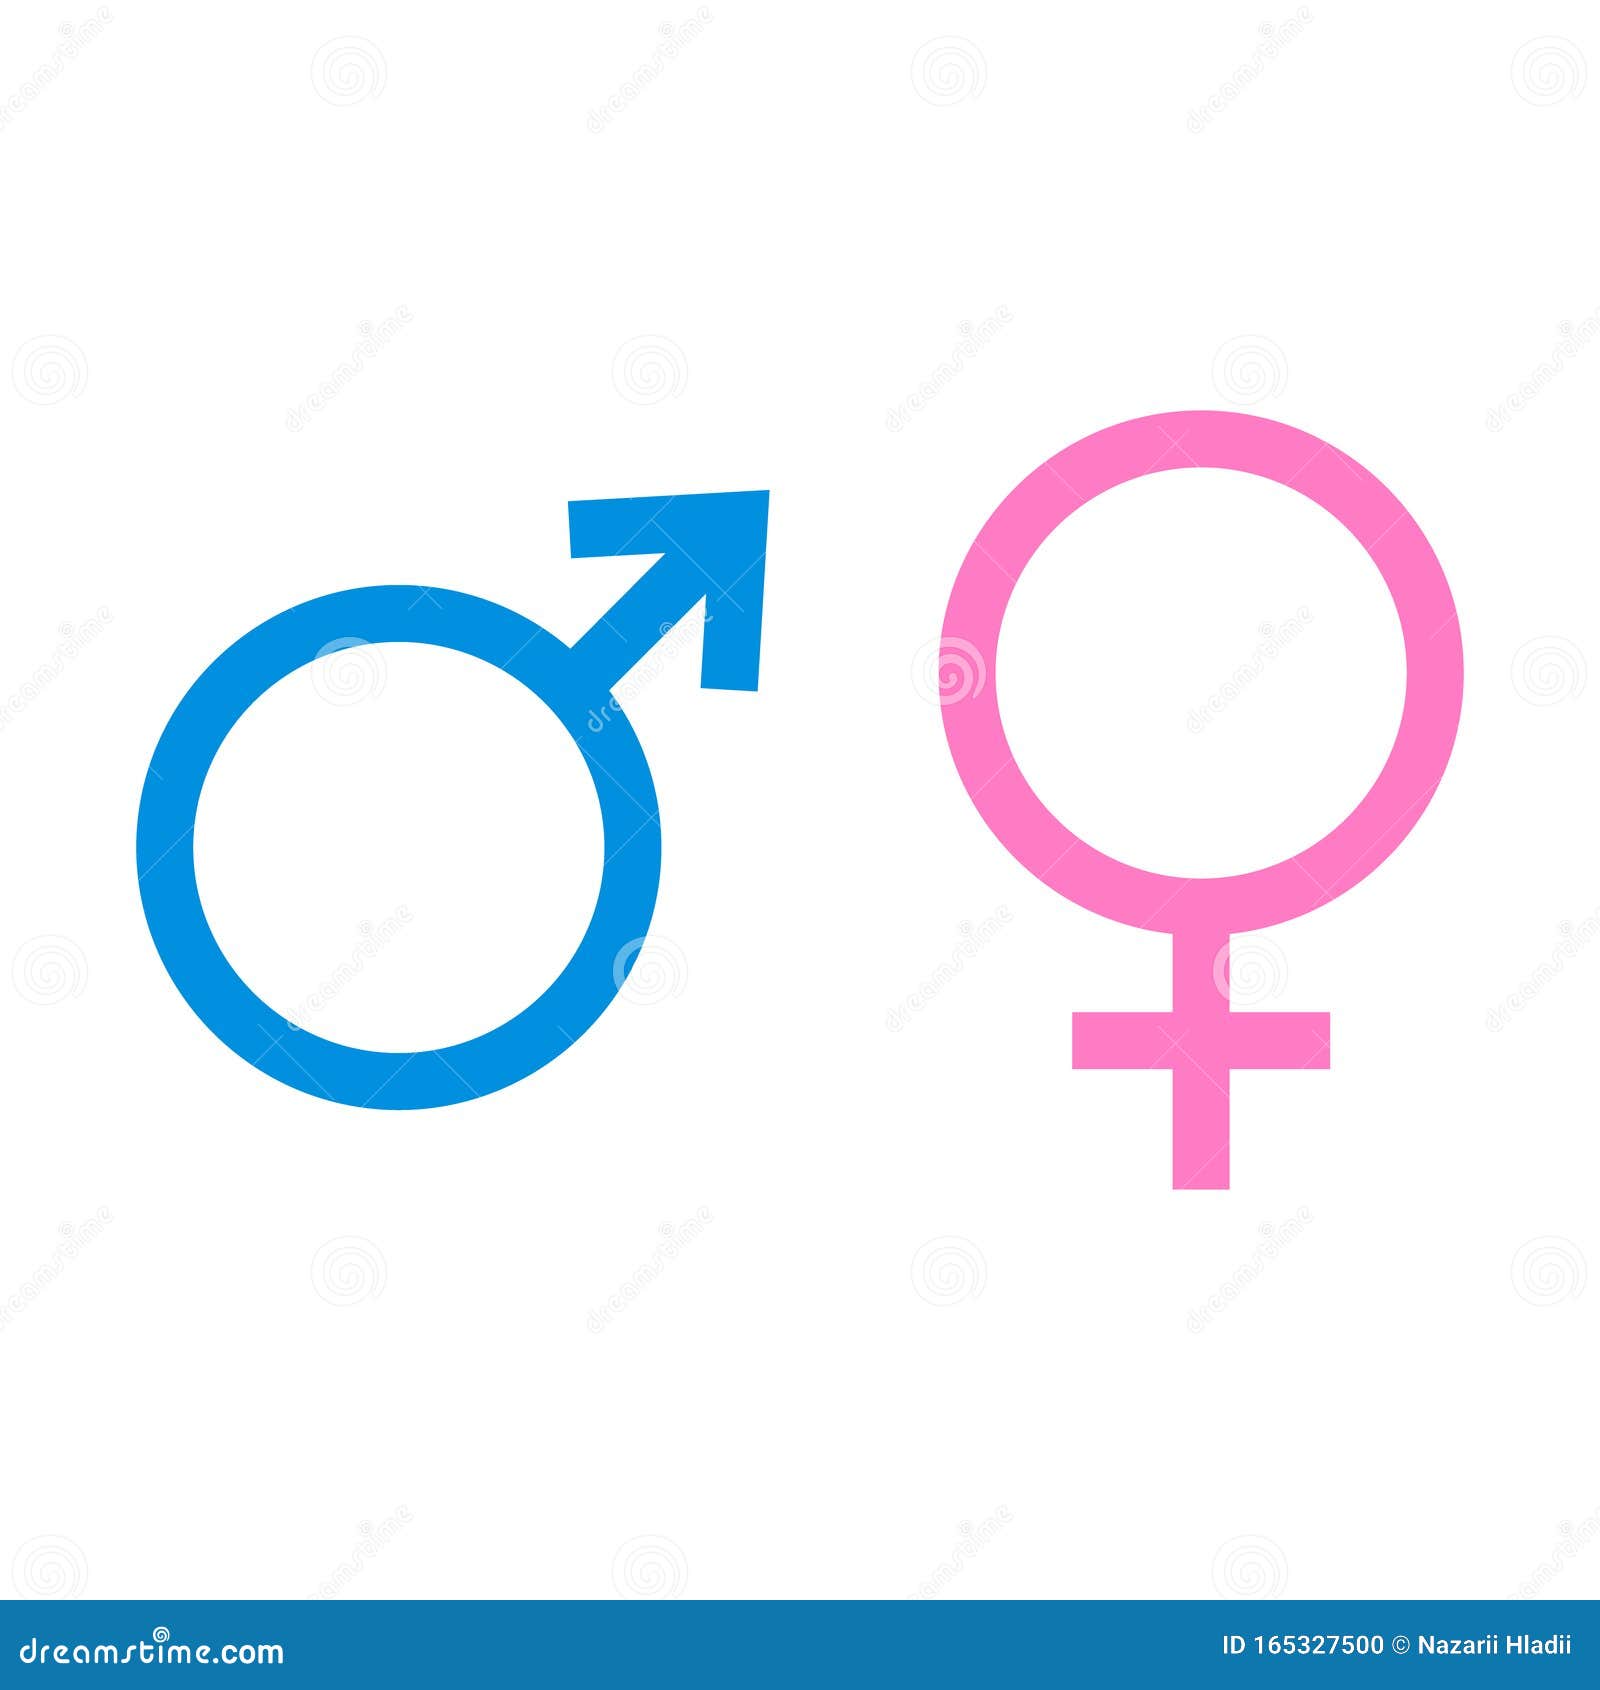 Vector Illustration of Male and Female Signs. Isolated. Stock Vector ...